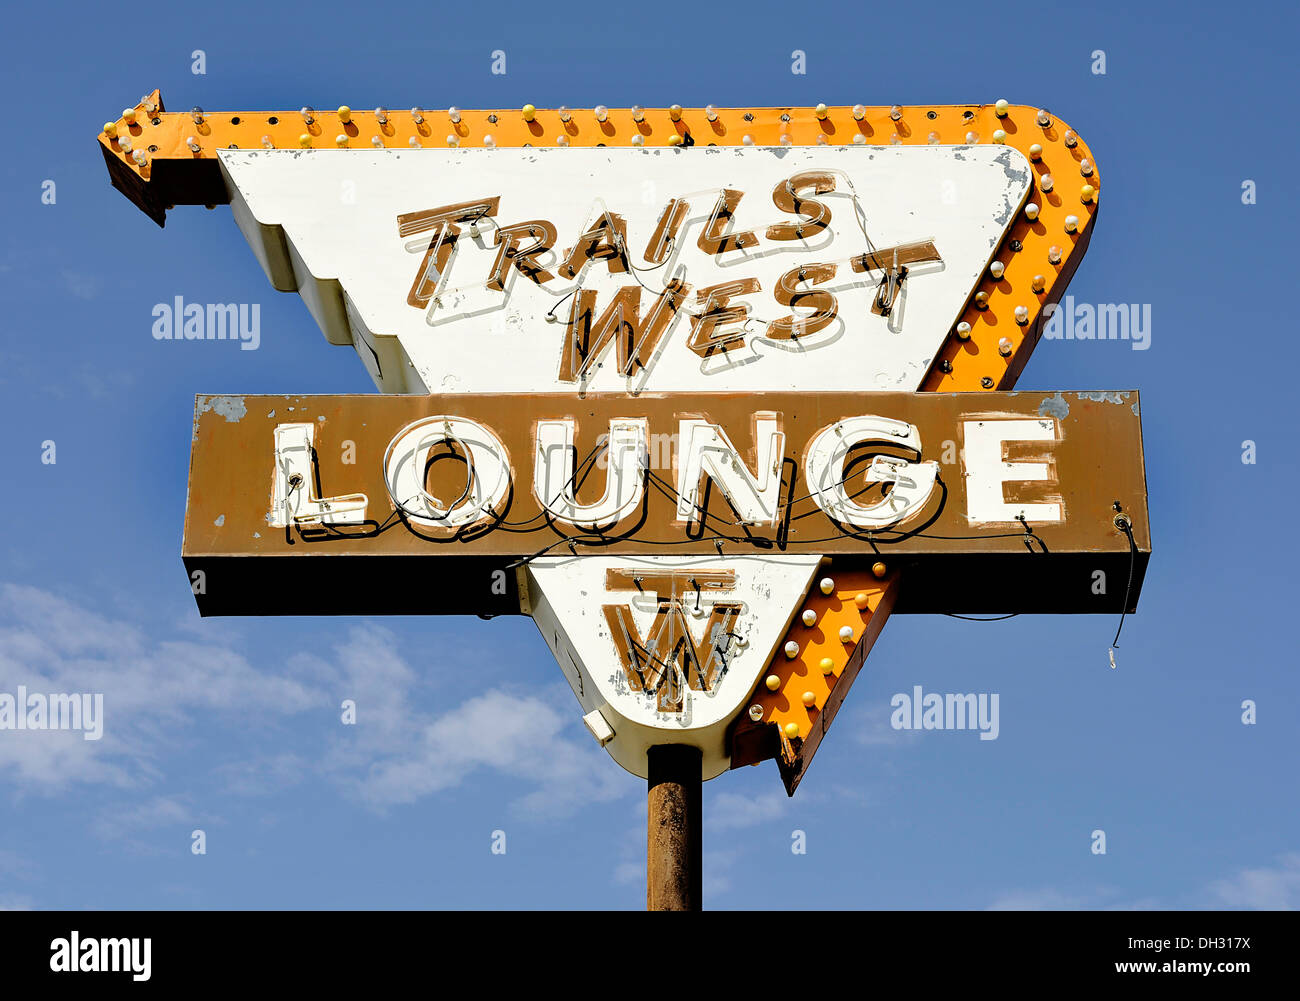 Trails West vintage sign on Route 66 against a blue sky. Tucumcari, New Mexico Stock Photo